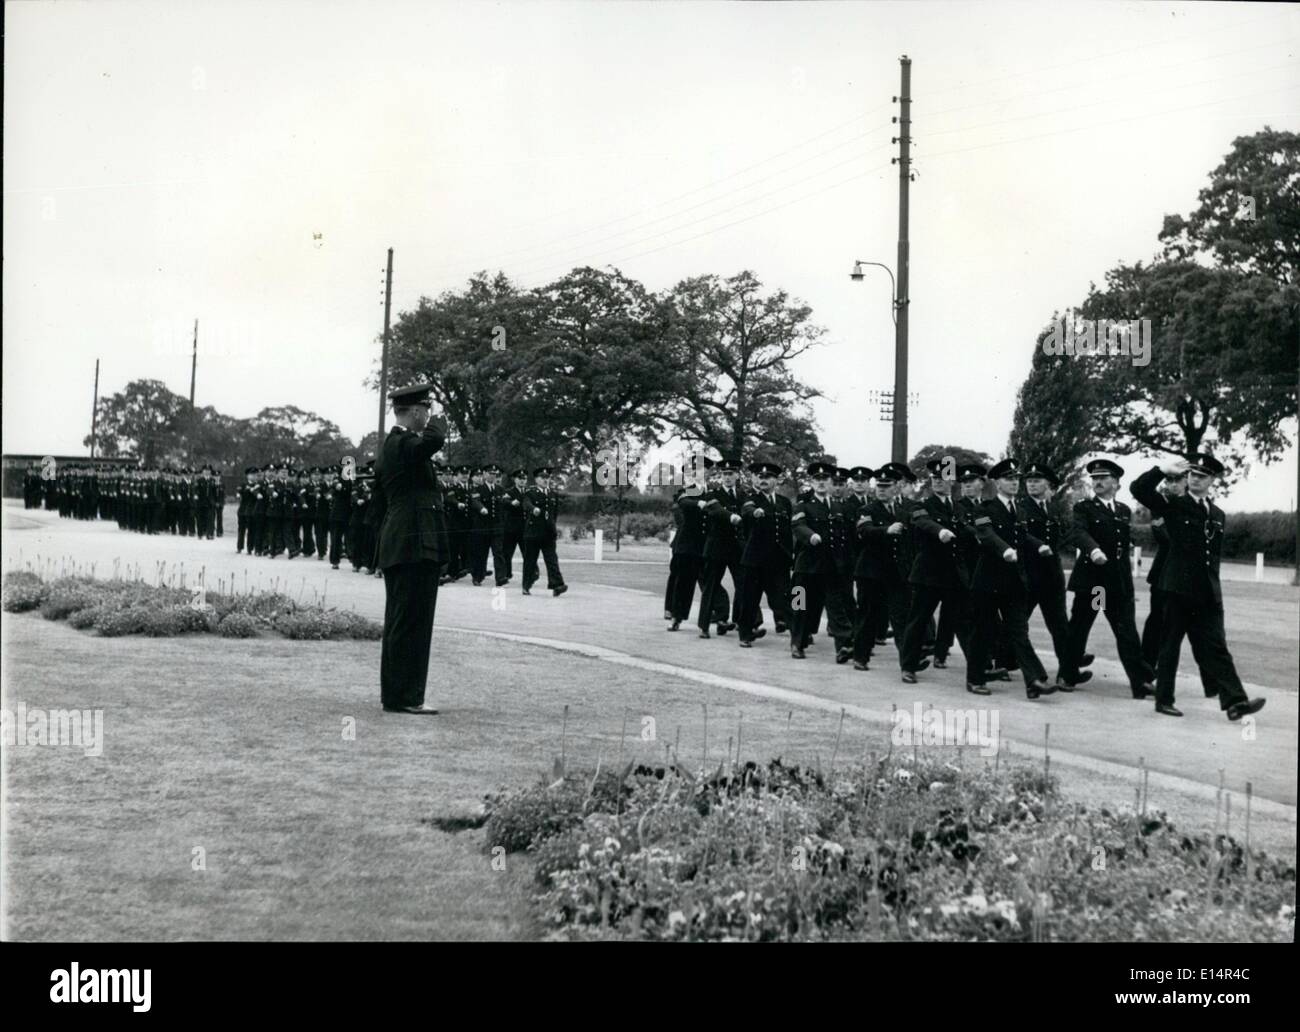 Apr. 18, 2012 - A march past of all ranks at the College. This is to display a form of discipline. Stock Photo